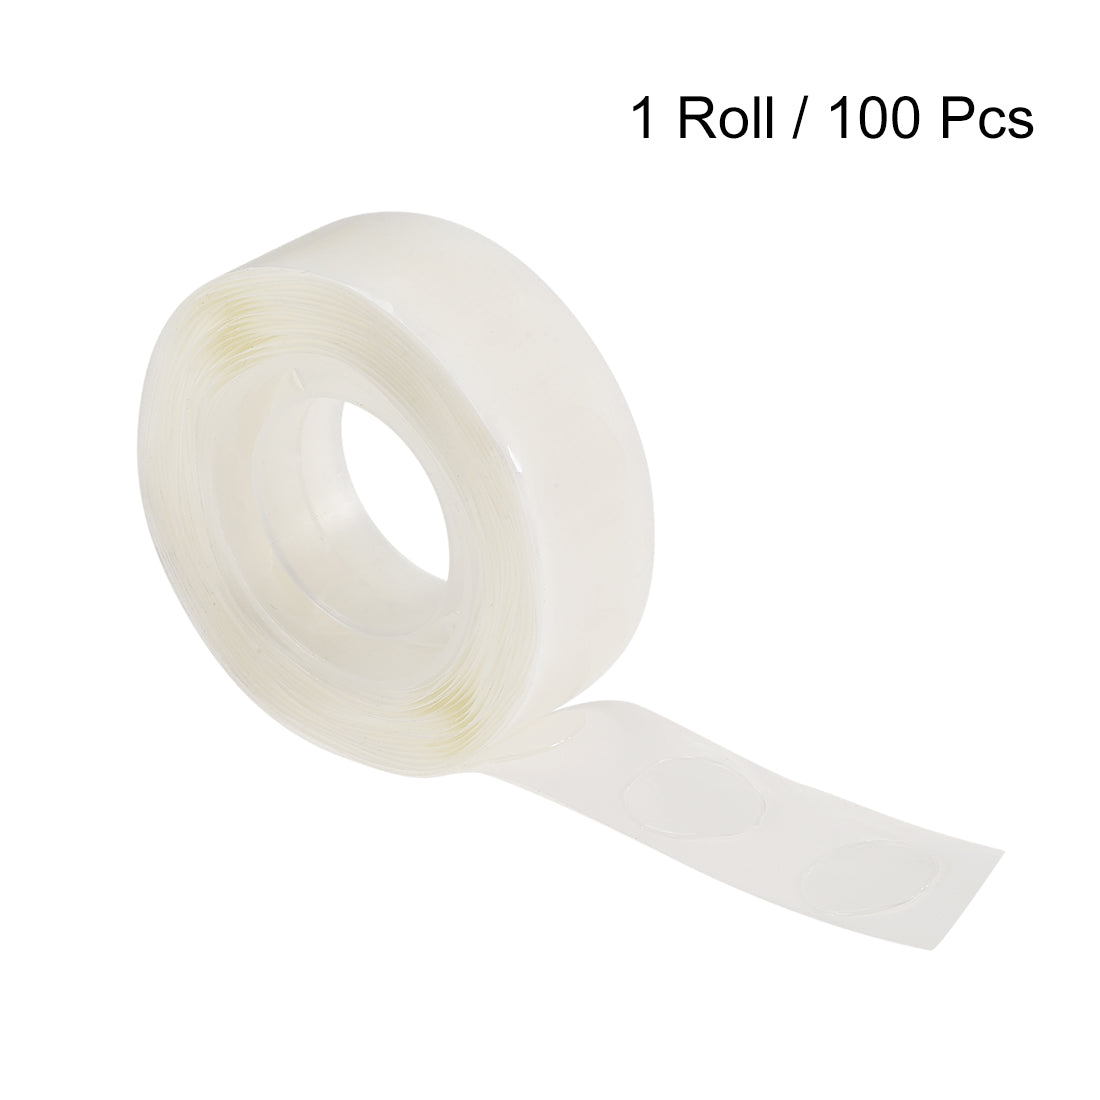 uxcell Uxcell Glue Point 12mm, 2 Sided Adhesive Tape for Crafts, 1 Roll/100 Pcs